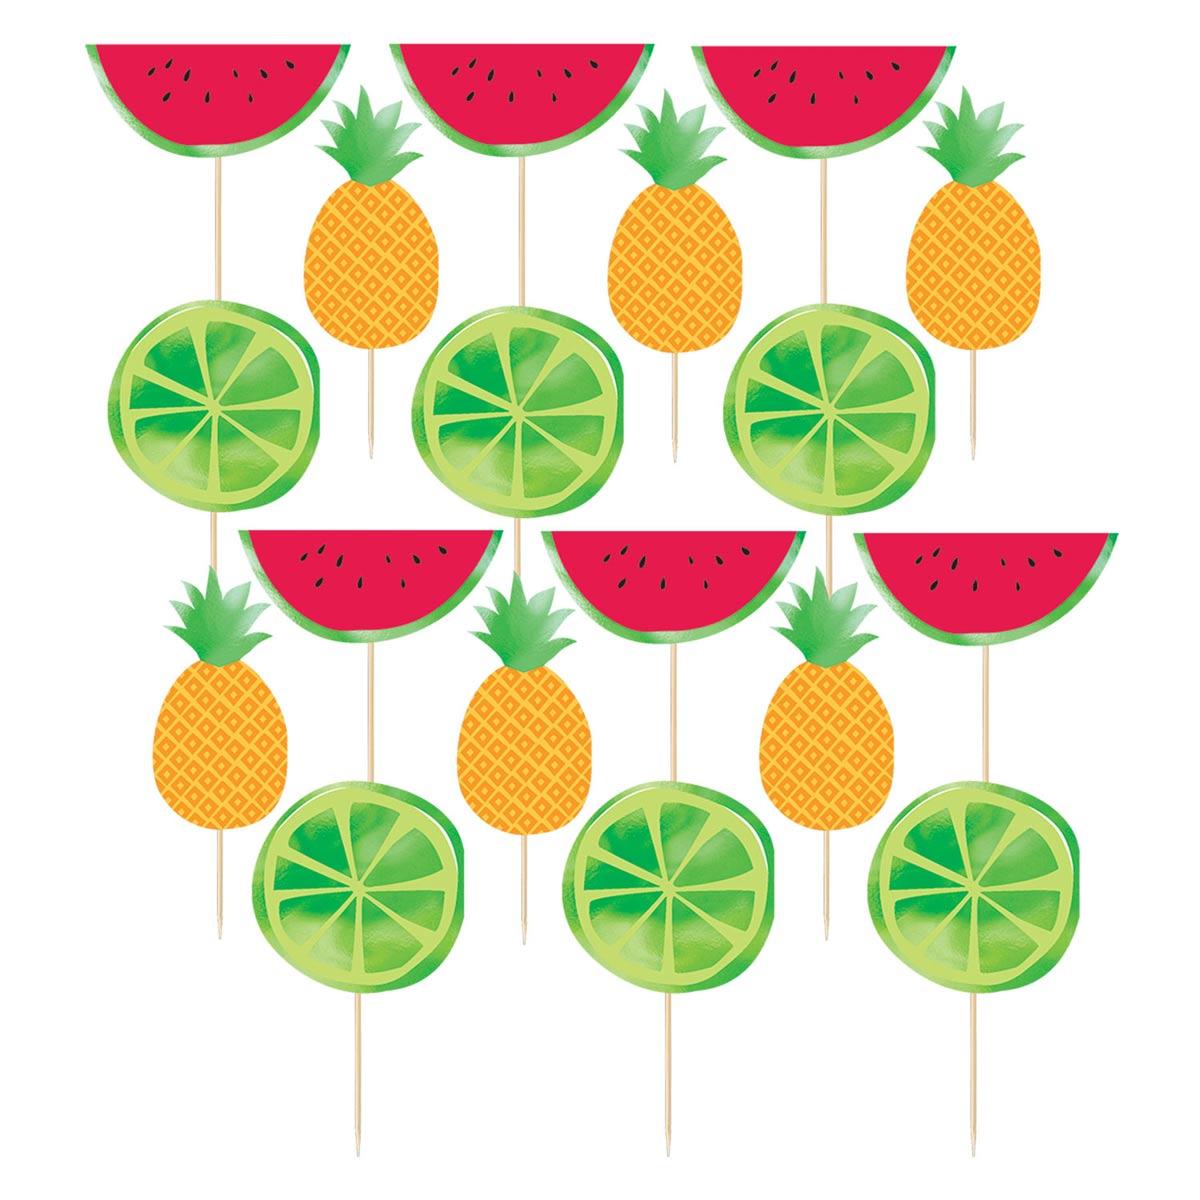 Fruit Salad Food Picks Pk24 pcs Colourful and Bright by Amscan 400223 available here at Karnival Costumes online party shop